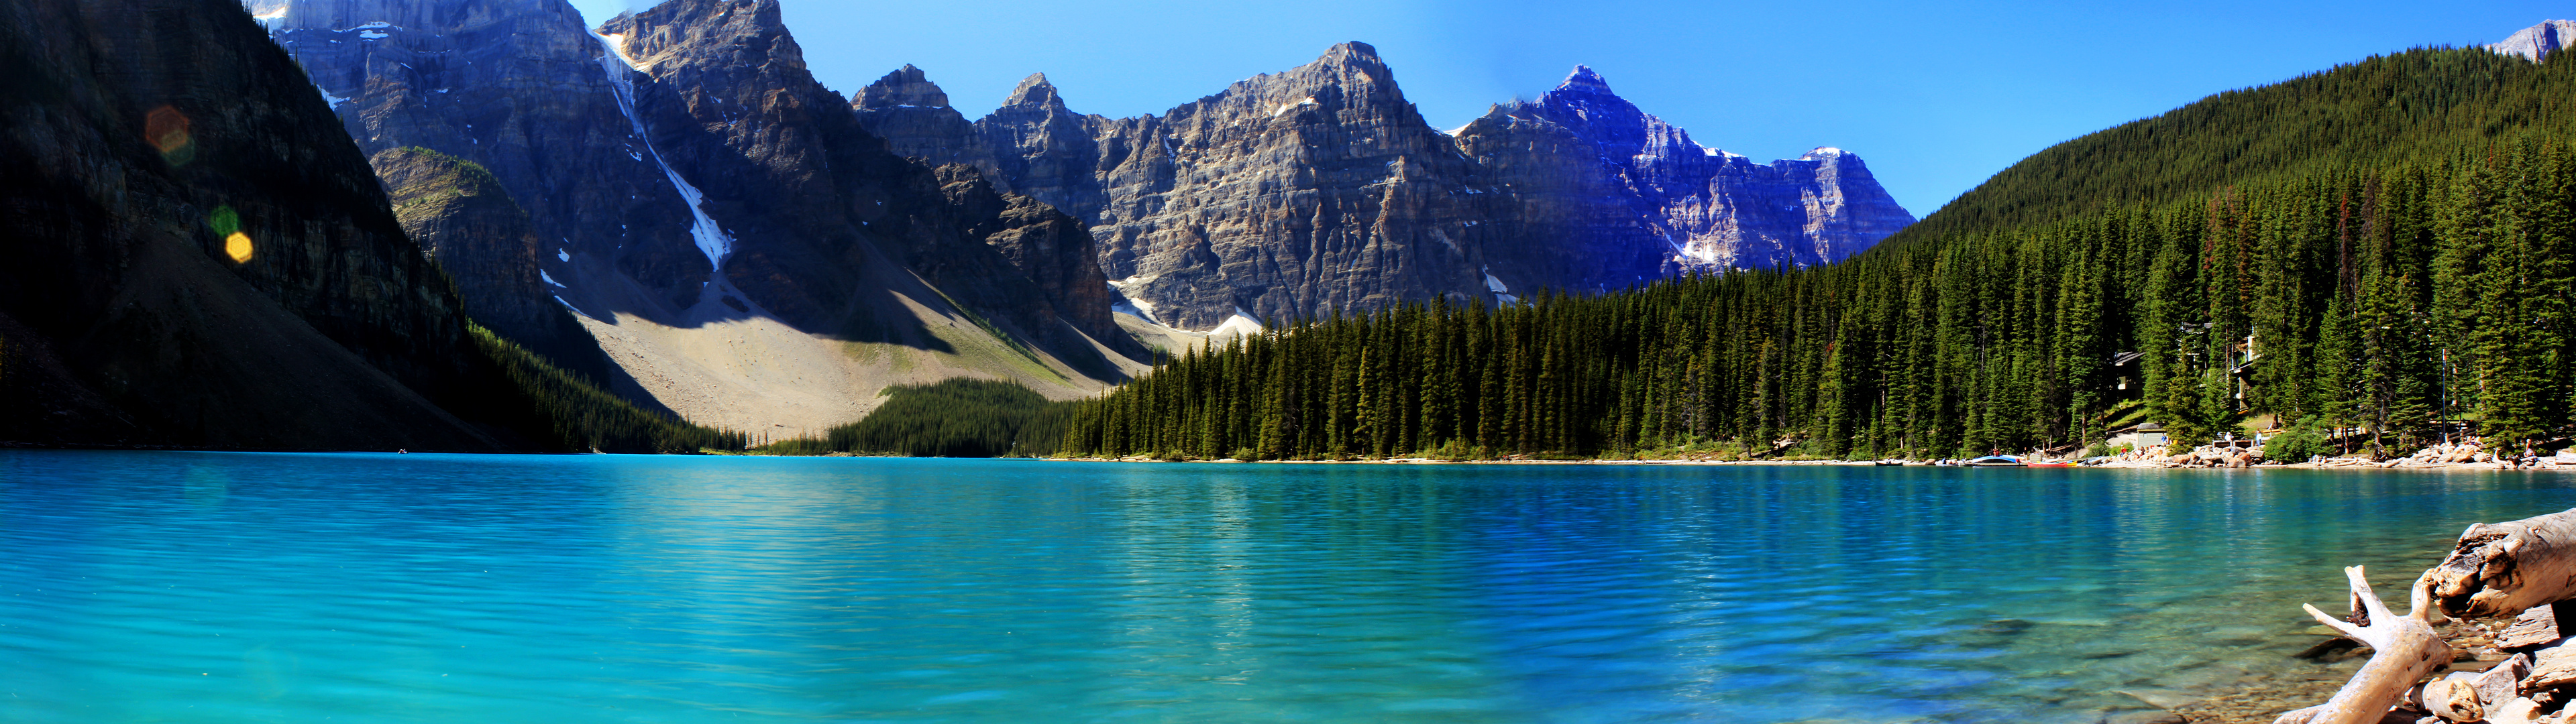 Stunning wallpapers, Immersive backgrounds, Nature's masterpiece, Picture-perfect beauty, 3840x1080 Dual Screen Desktop